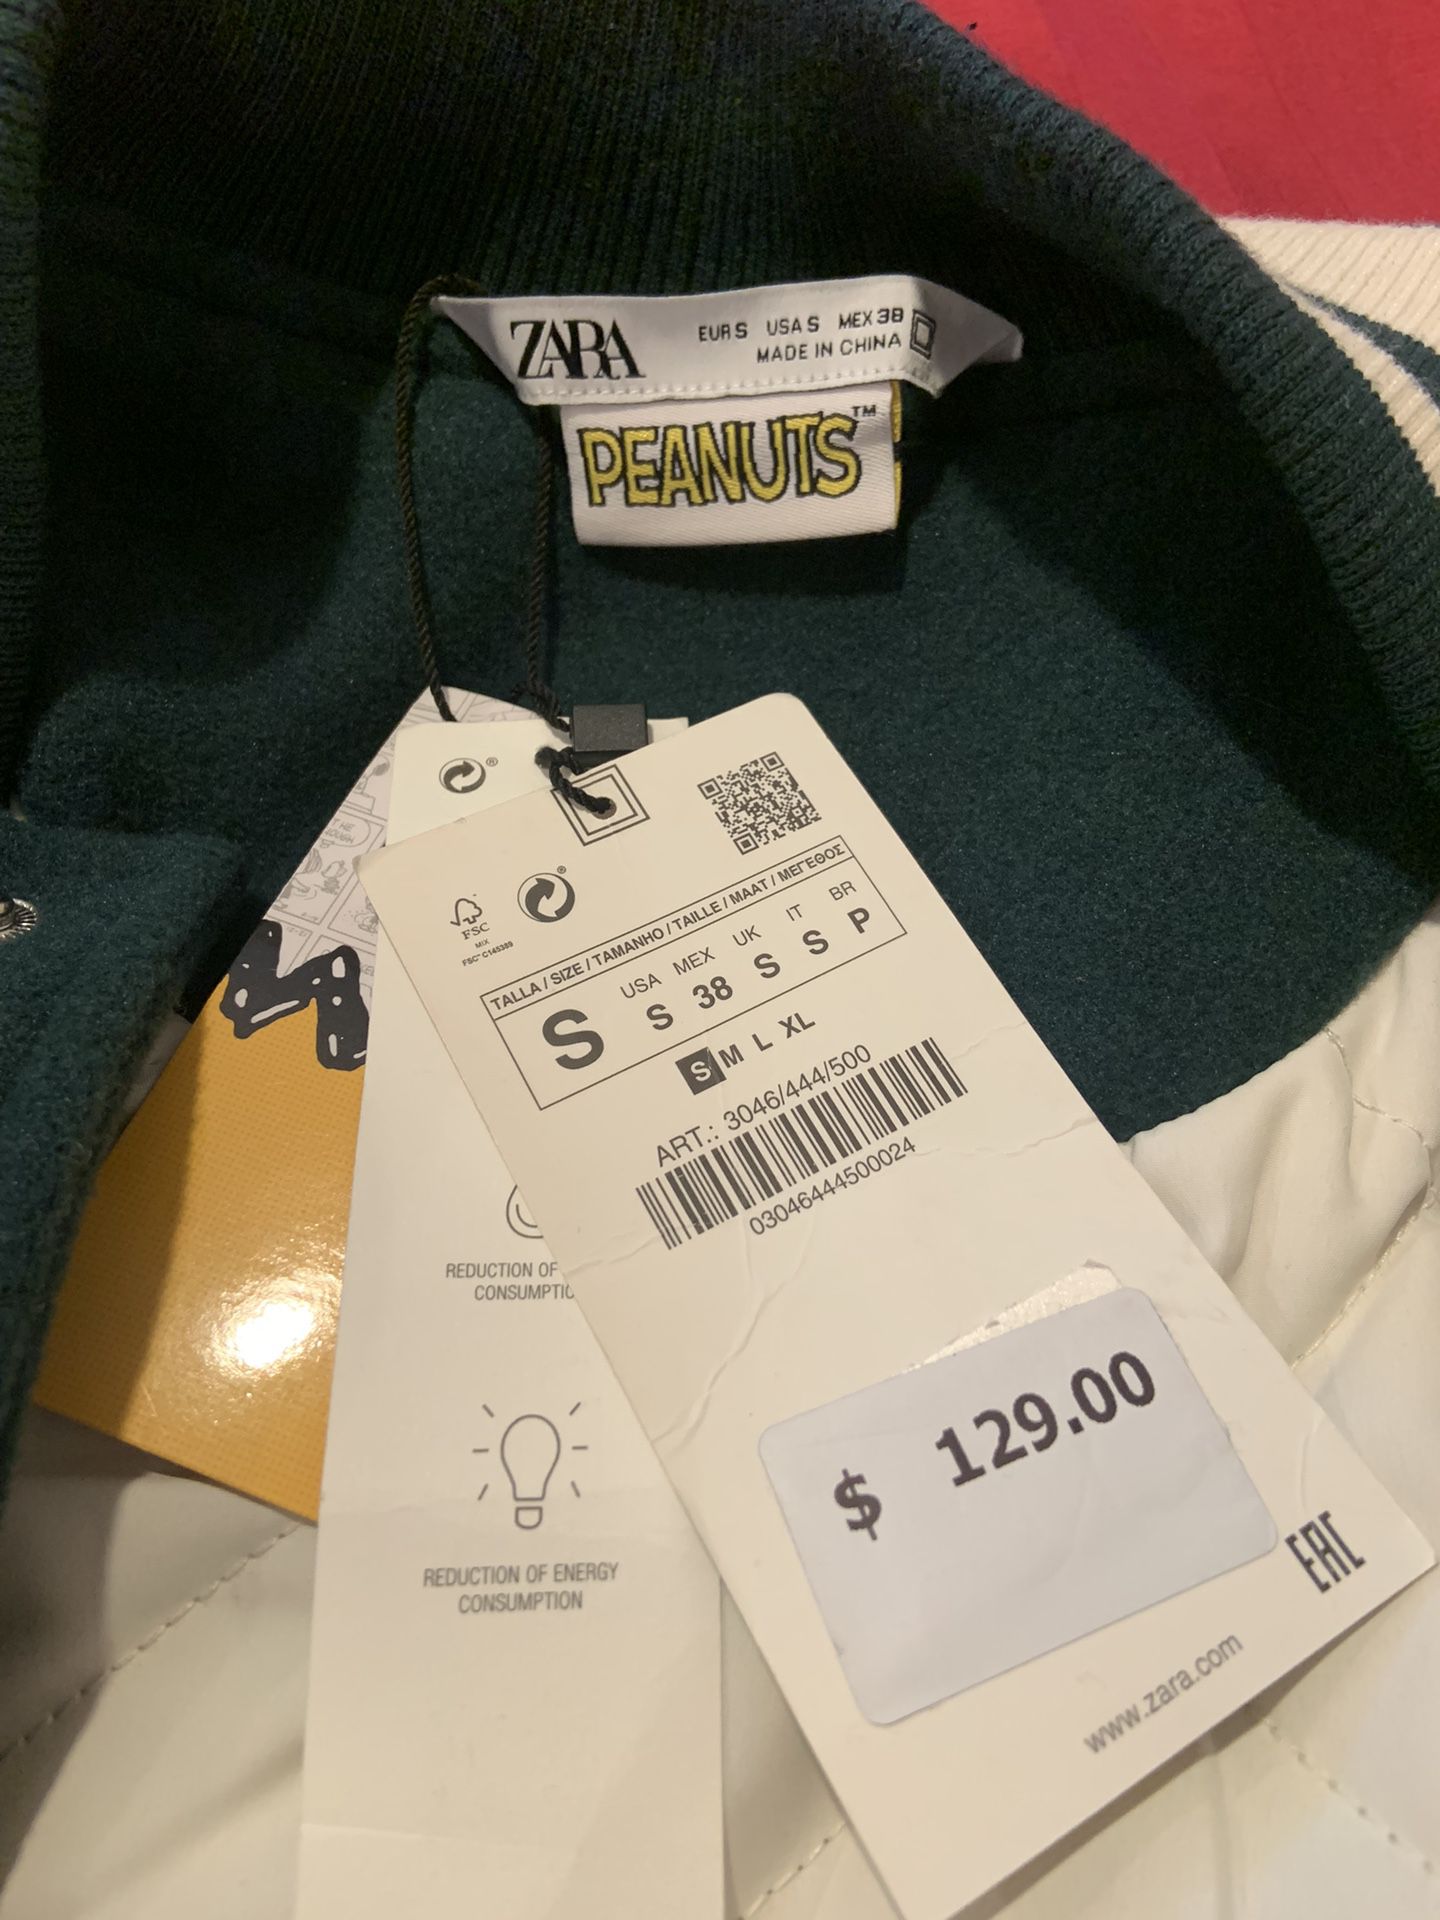 Replica Louis Vuitton x Fragments Varsity Jacket size S for Sale in  Pasadena, CA - OfferUp